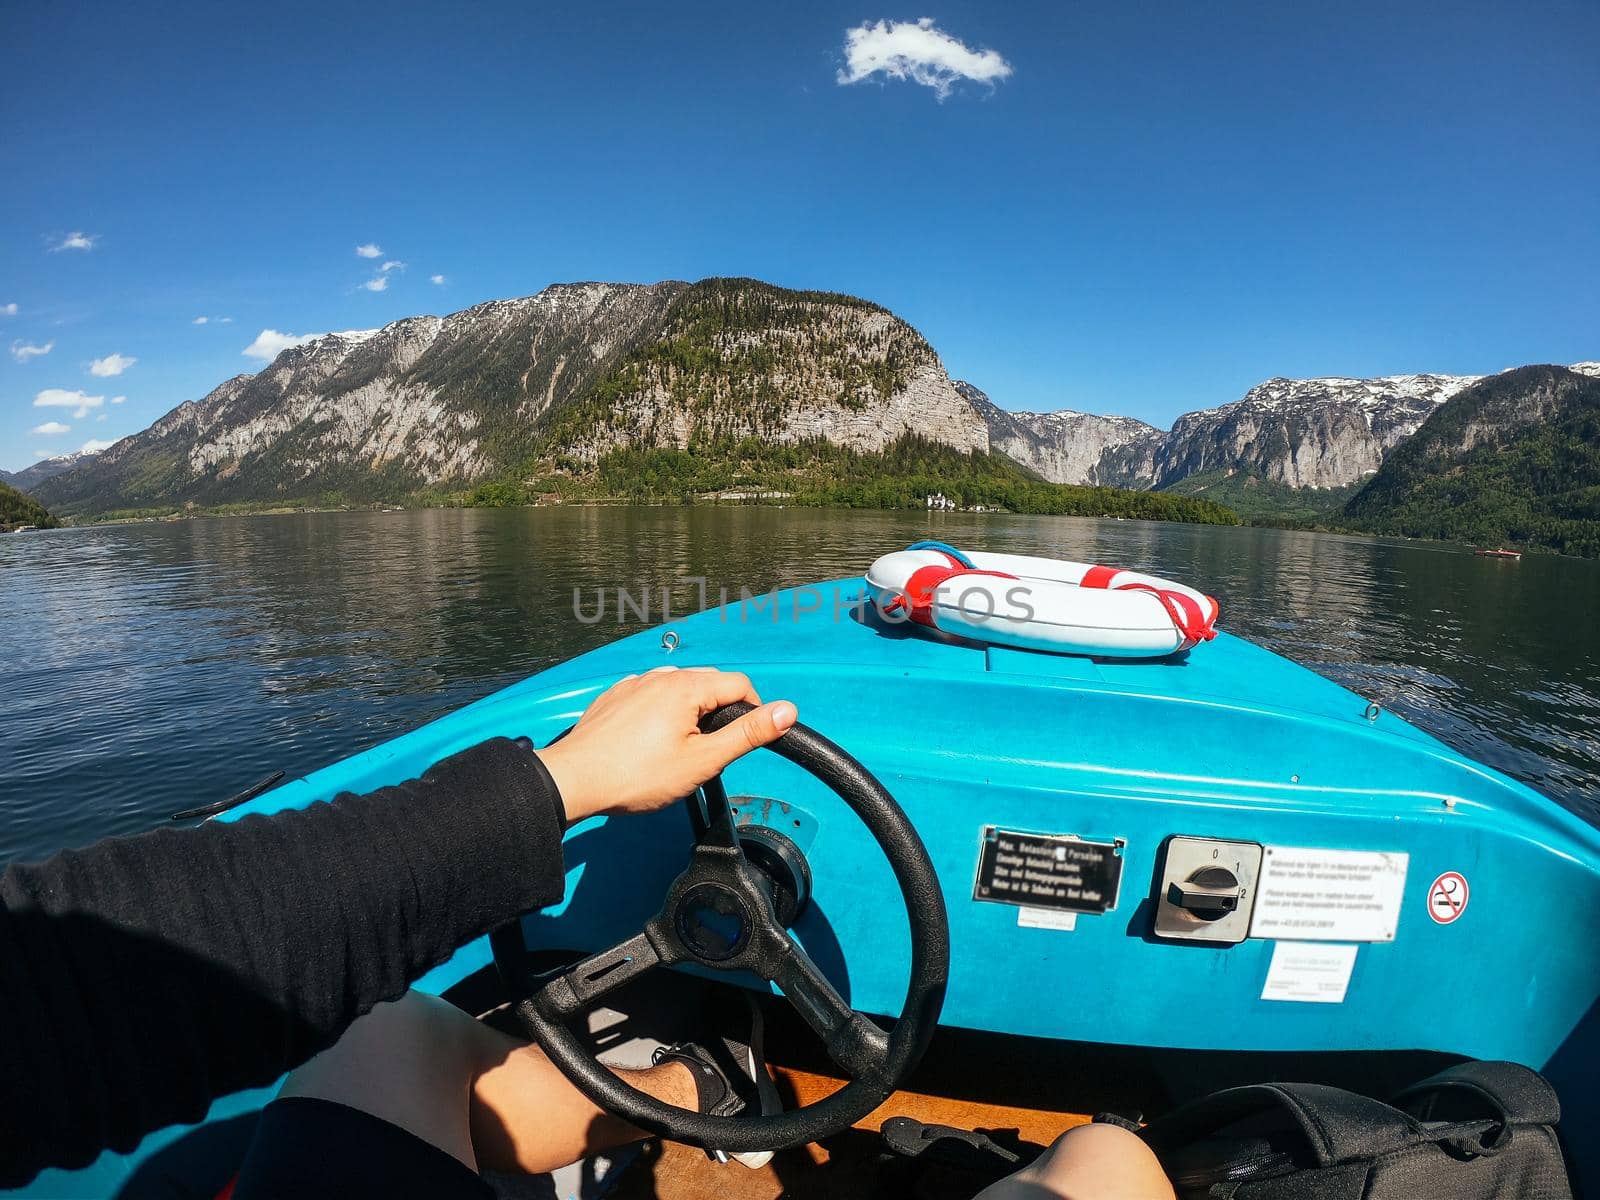 Guy controls a motorboat on a mountain lake